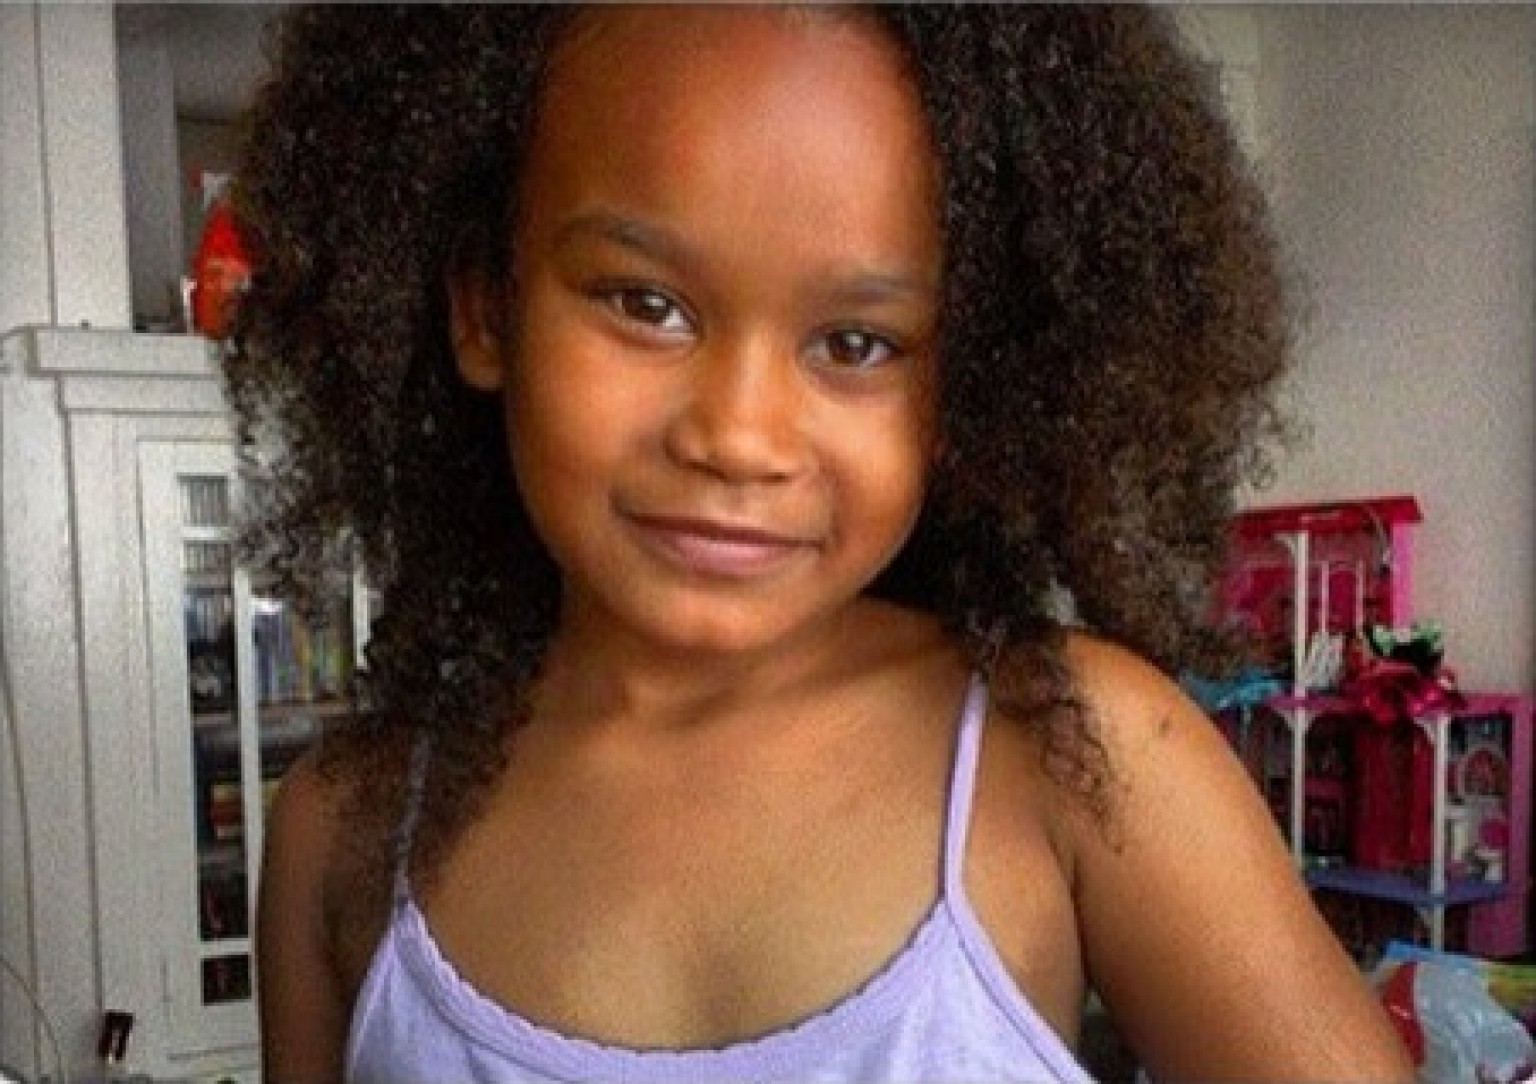 6 Year Old Girl Fatally Shot In Gang Violence Prompts Donations From 